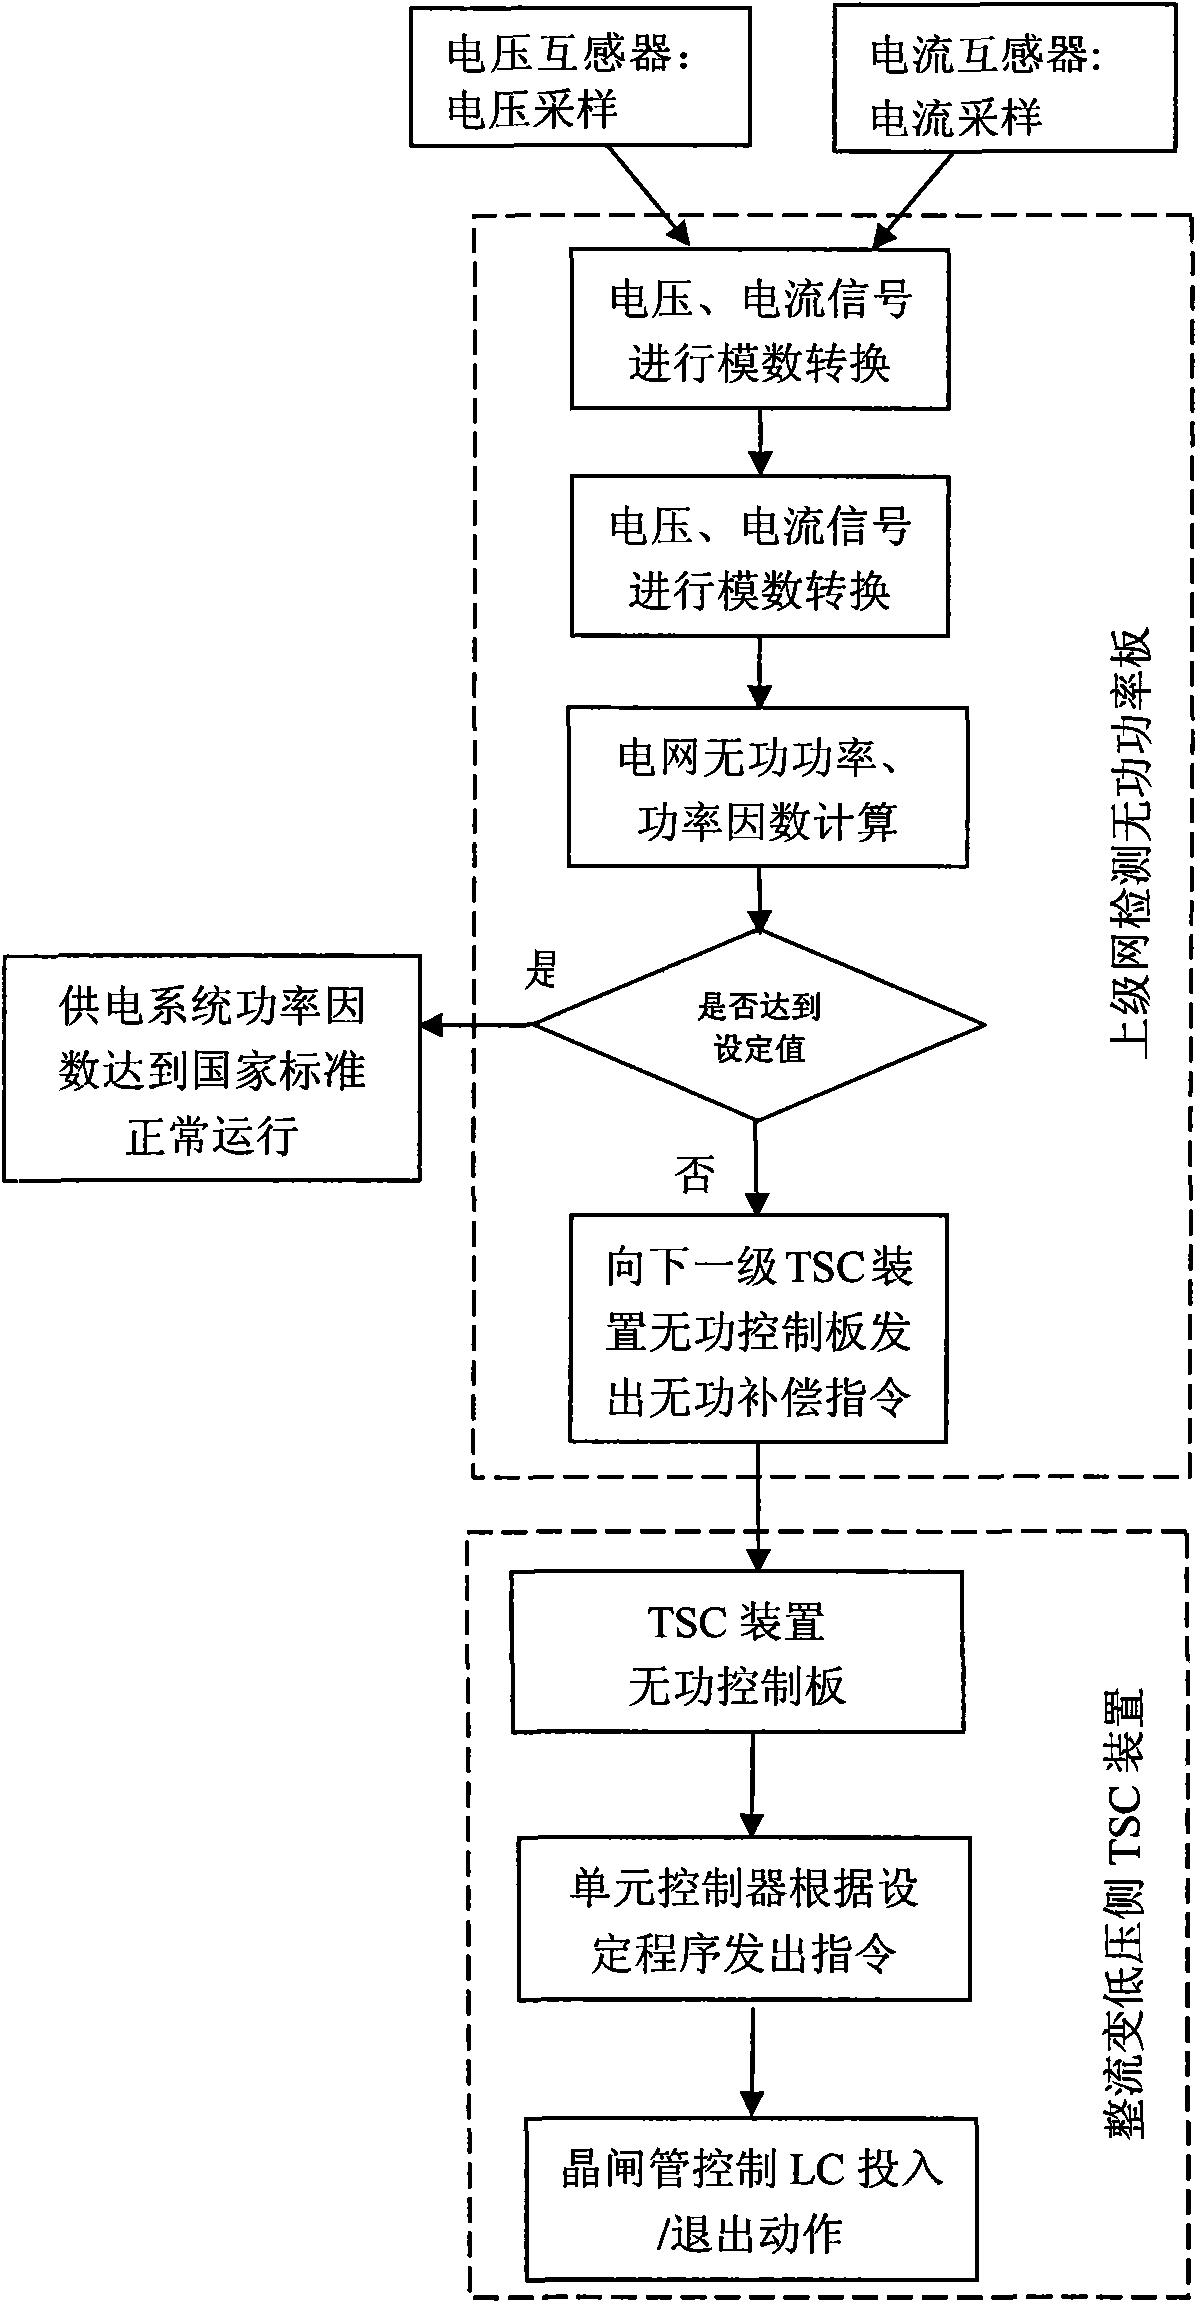 Controller of production clearance reactive power compensation device of power supply and distribution systems of small steel rolling workshop